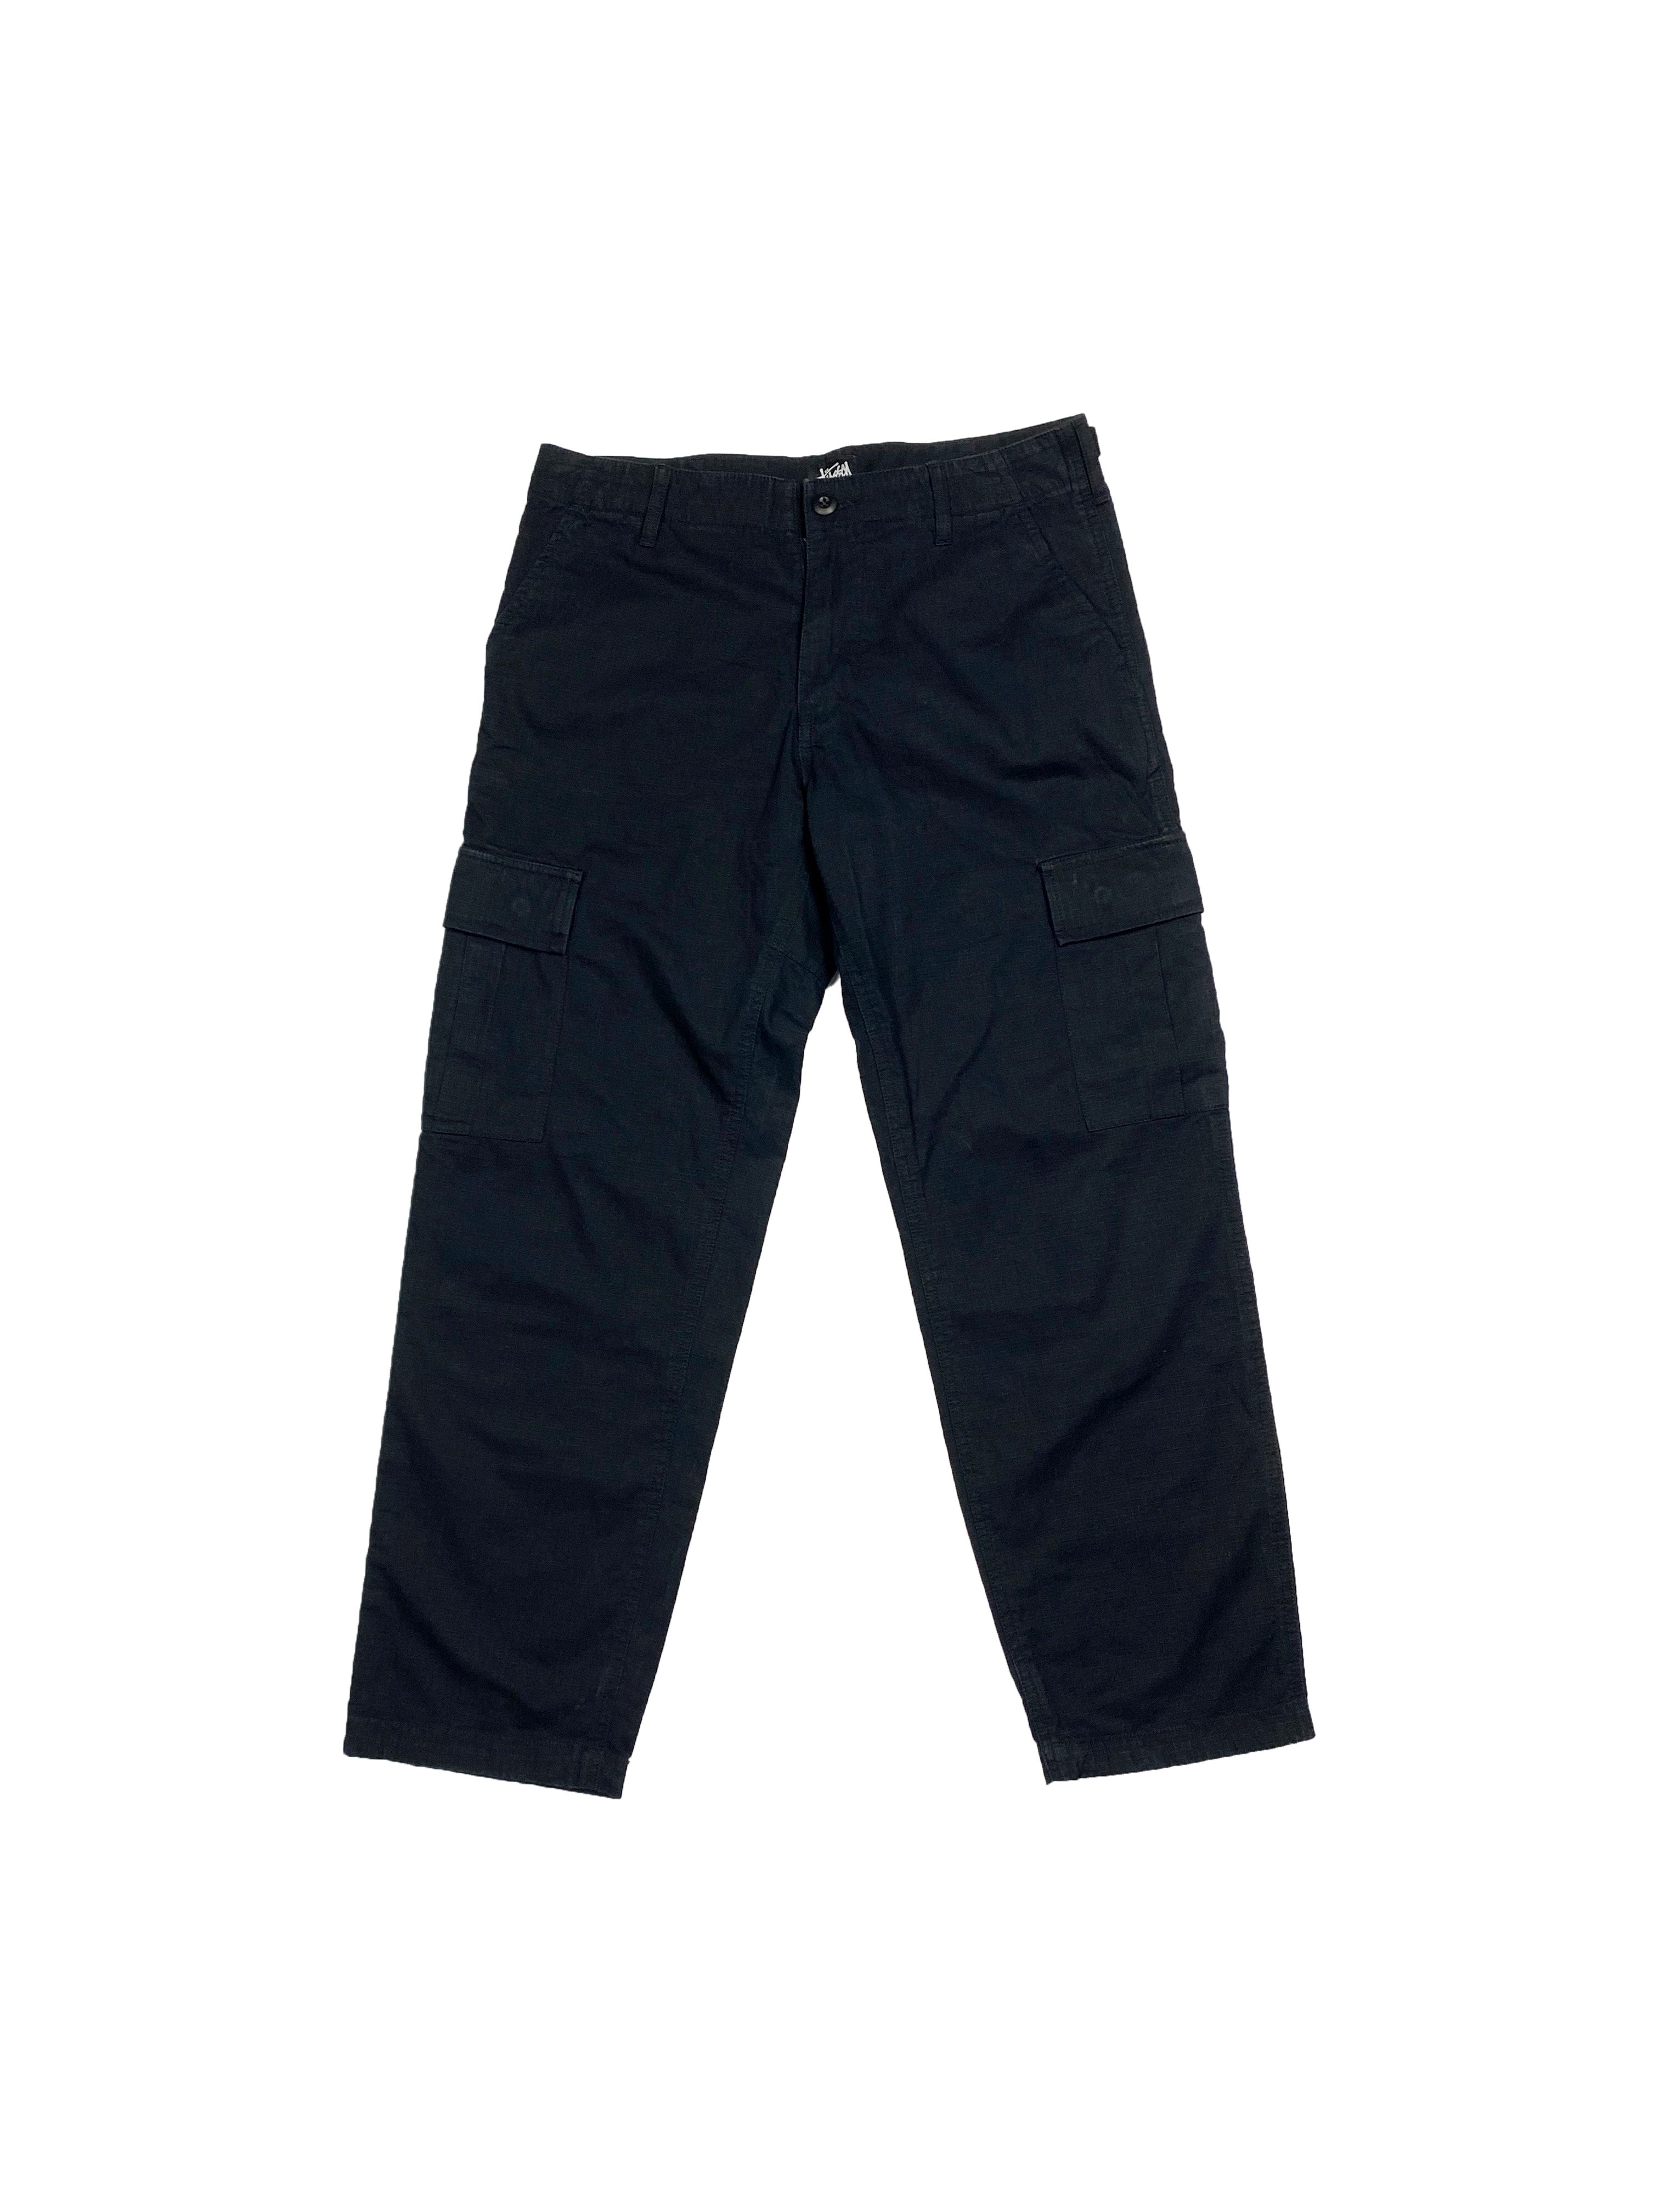 Stussy Black Ripstop Cargo Trousers 00's